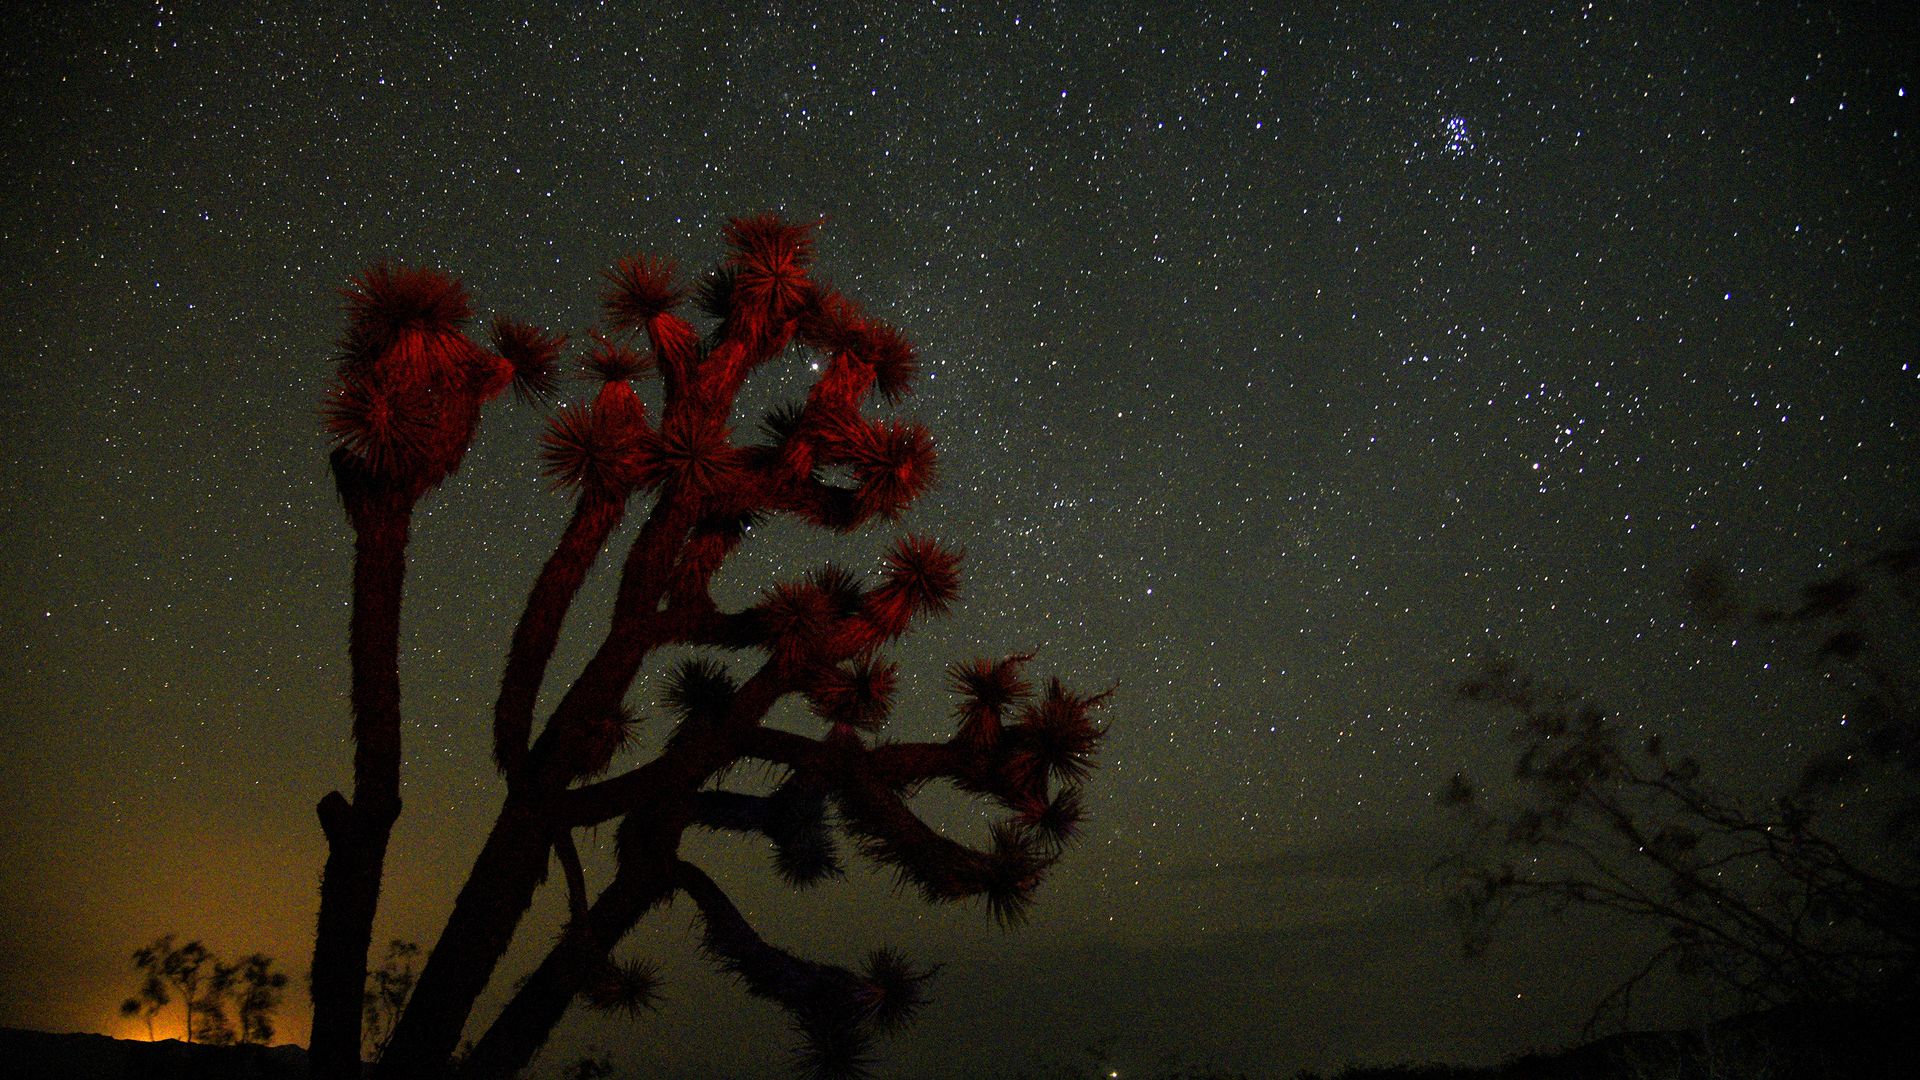 A meteorite streaks over a Yucca Tree